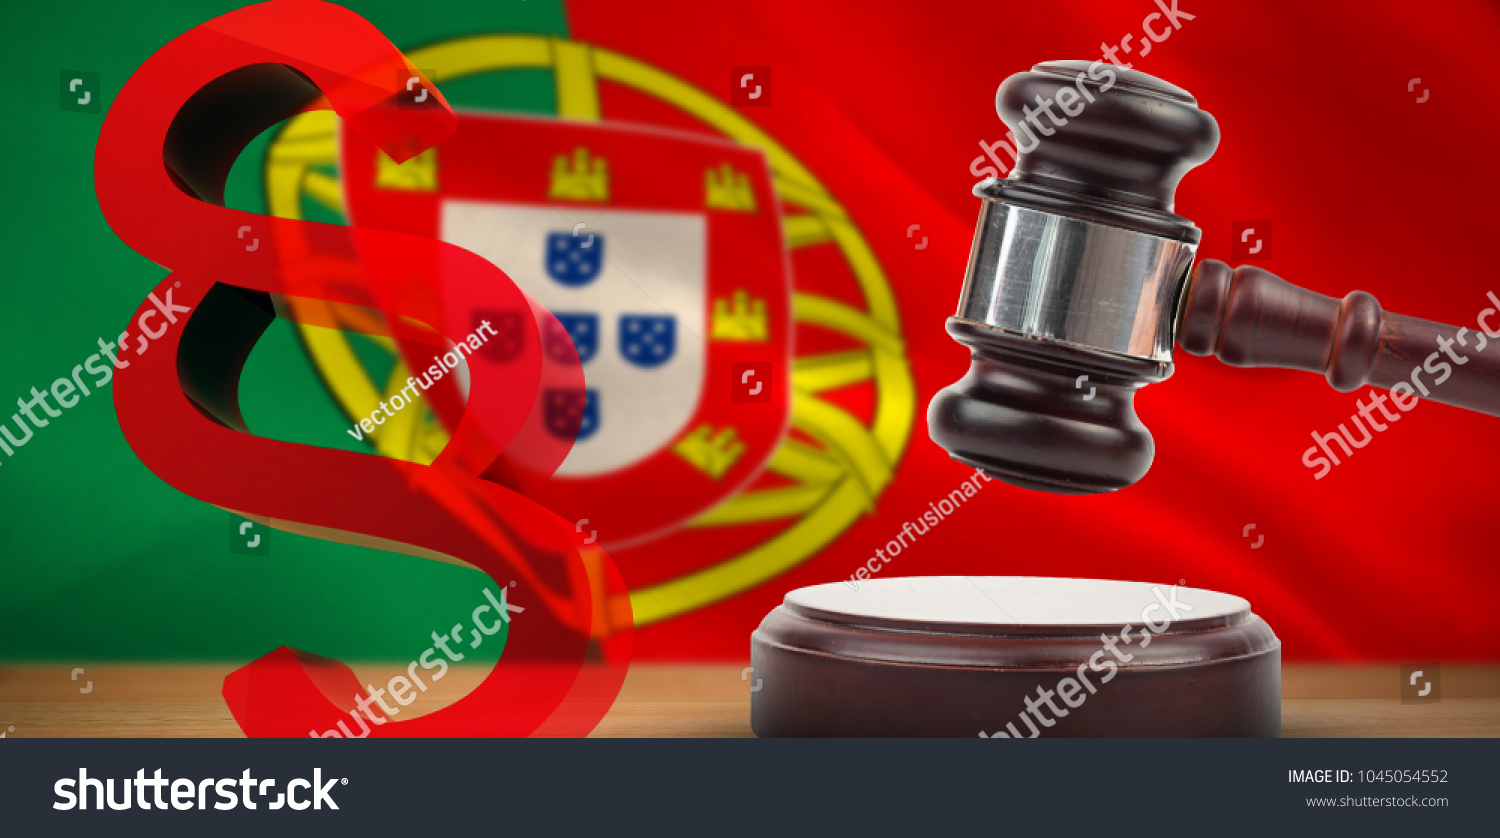 Vector icon of section symbol against digitally generated portugese national flag #1045054552